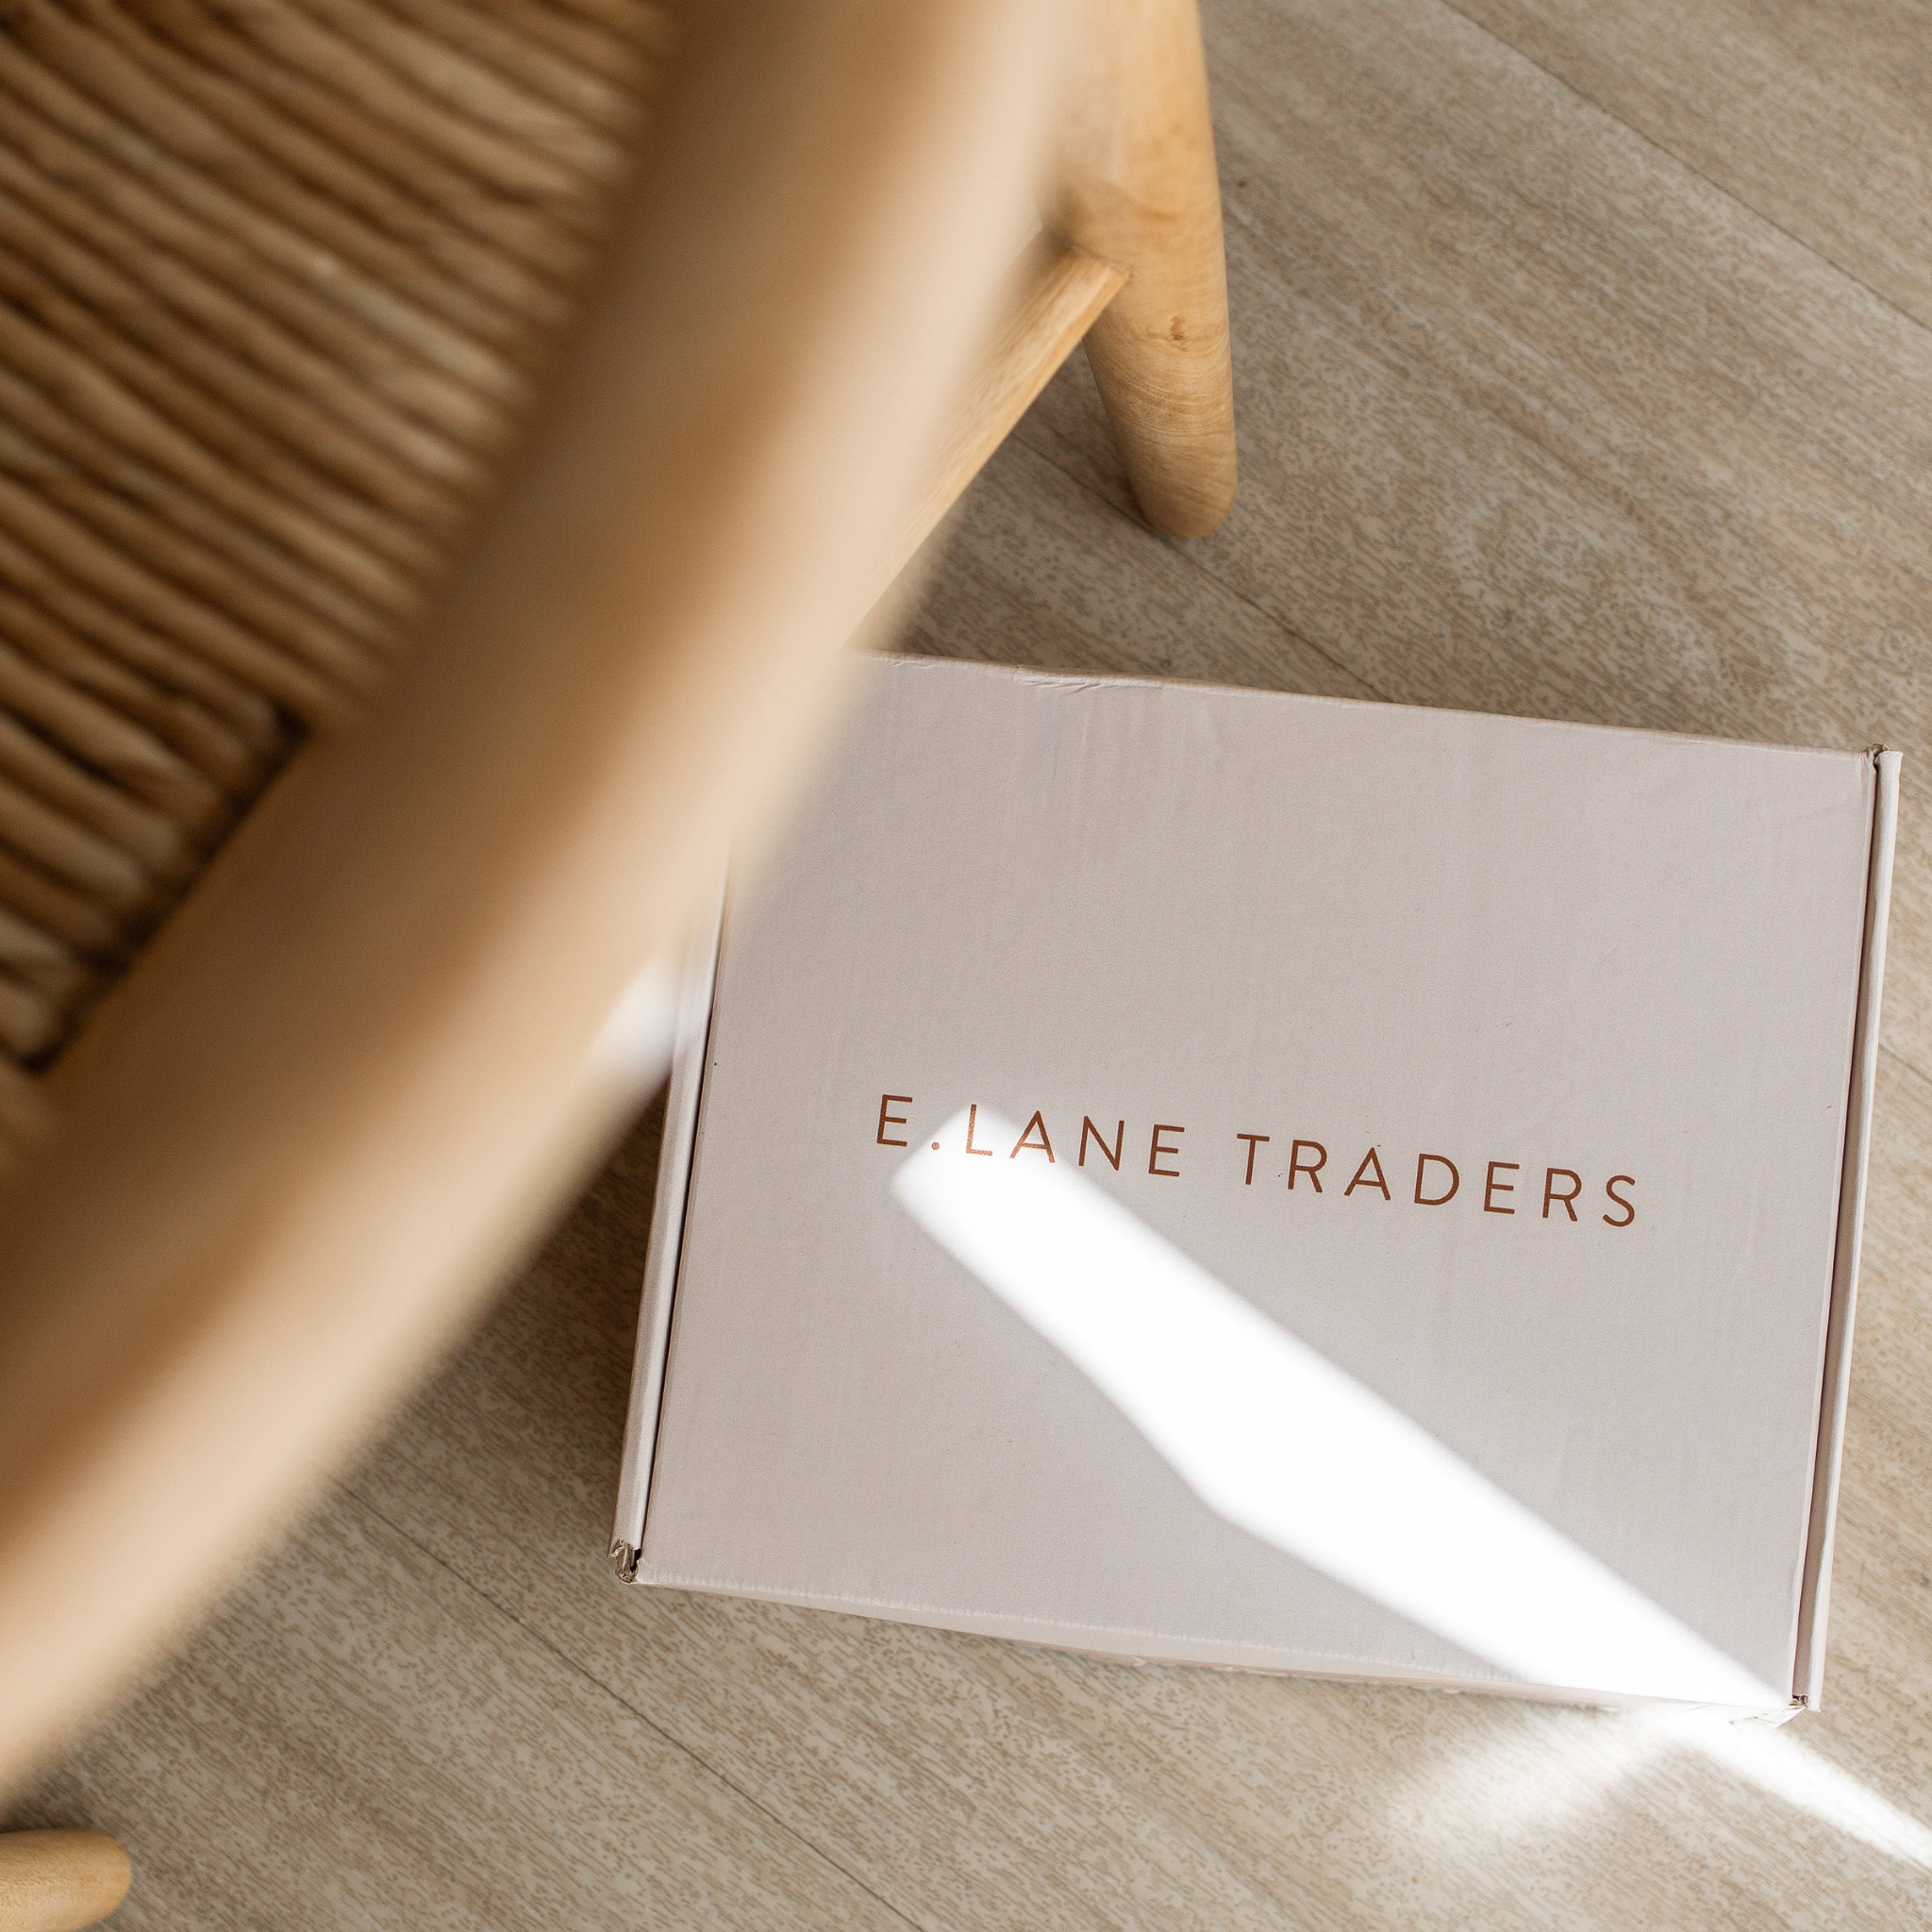 Gifting made easy with e. lane traders